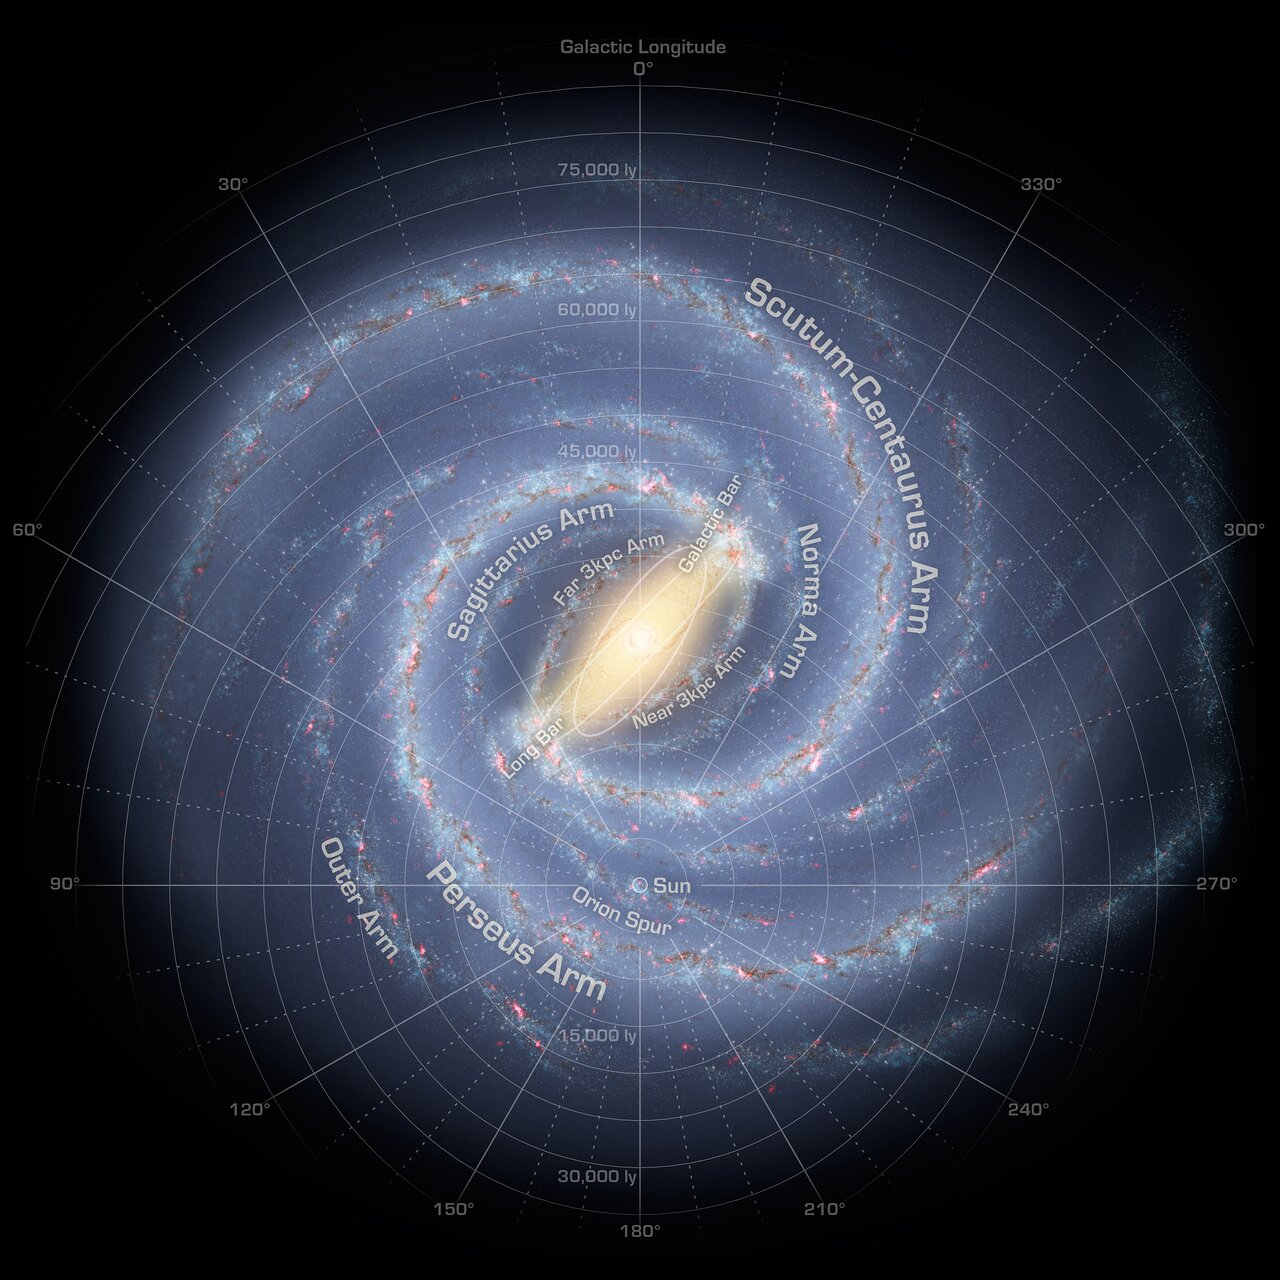 Our best map of the Milky Way so far.